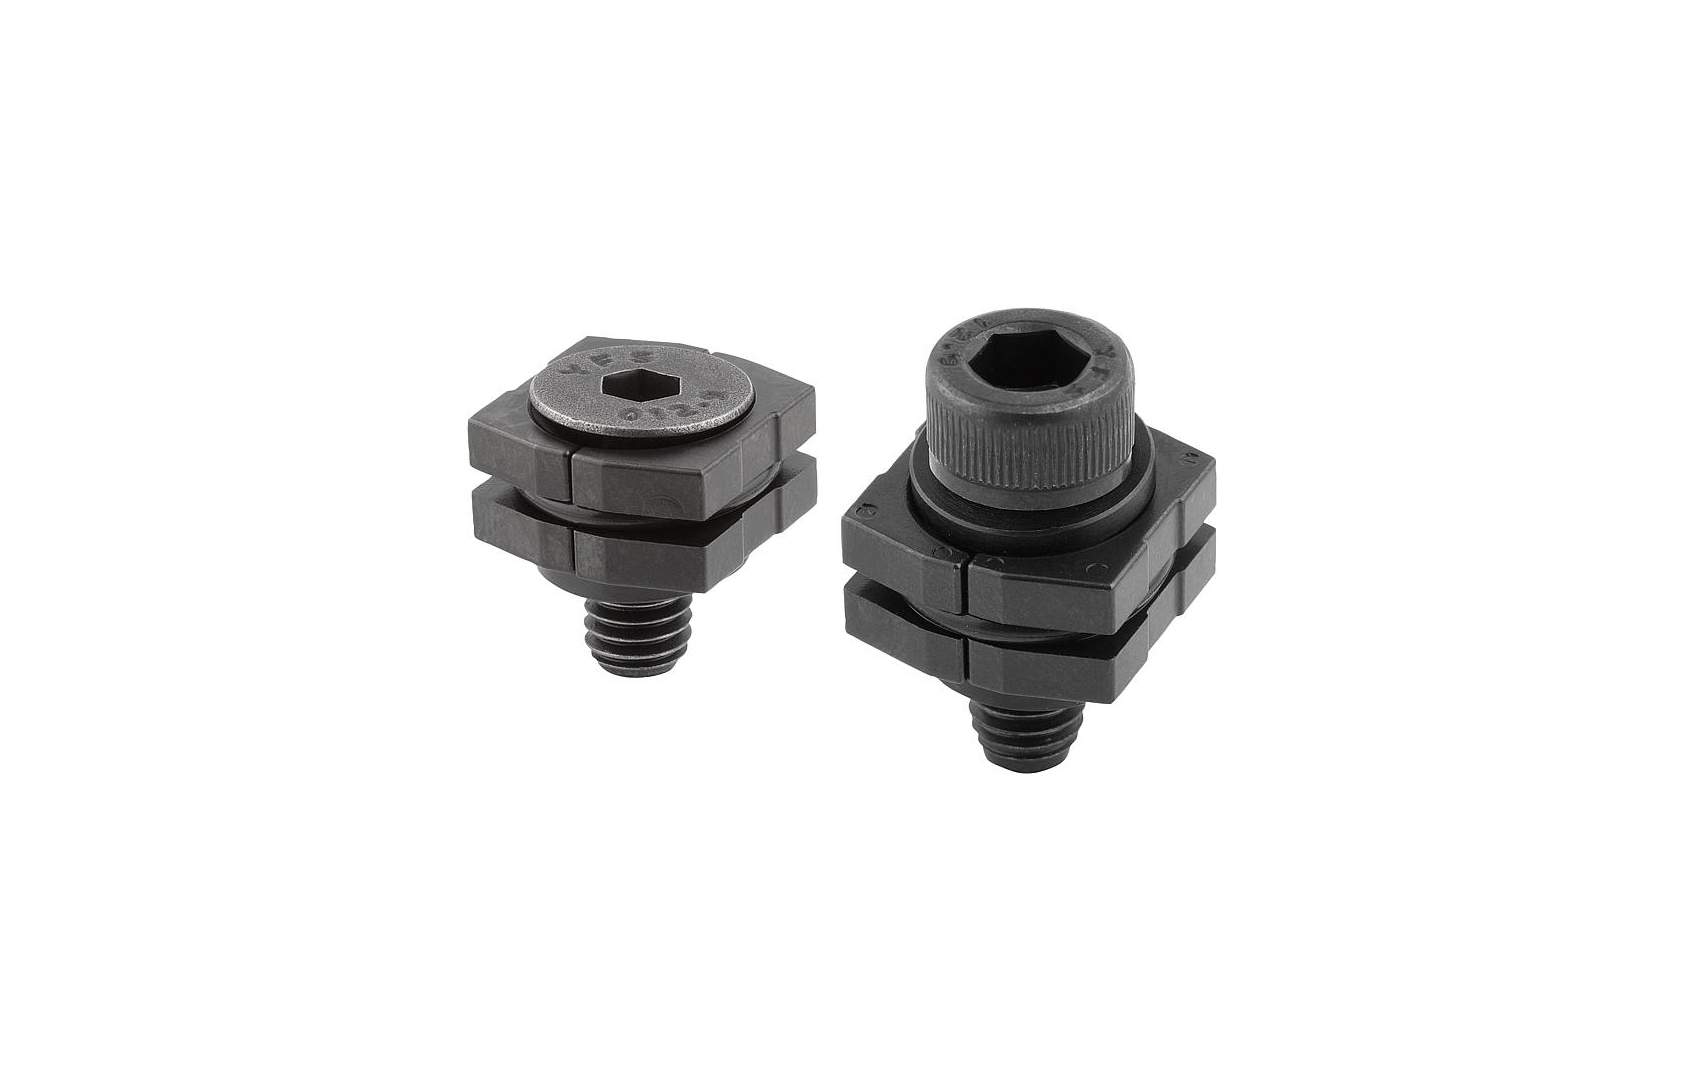 K1167 Wedge clamps